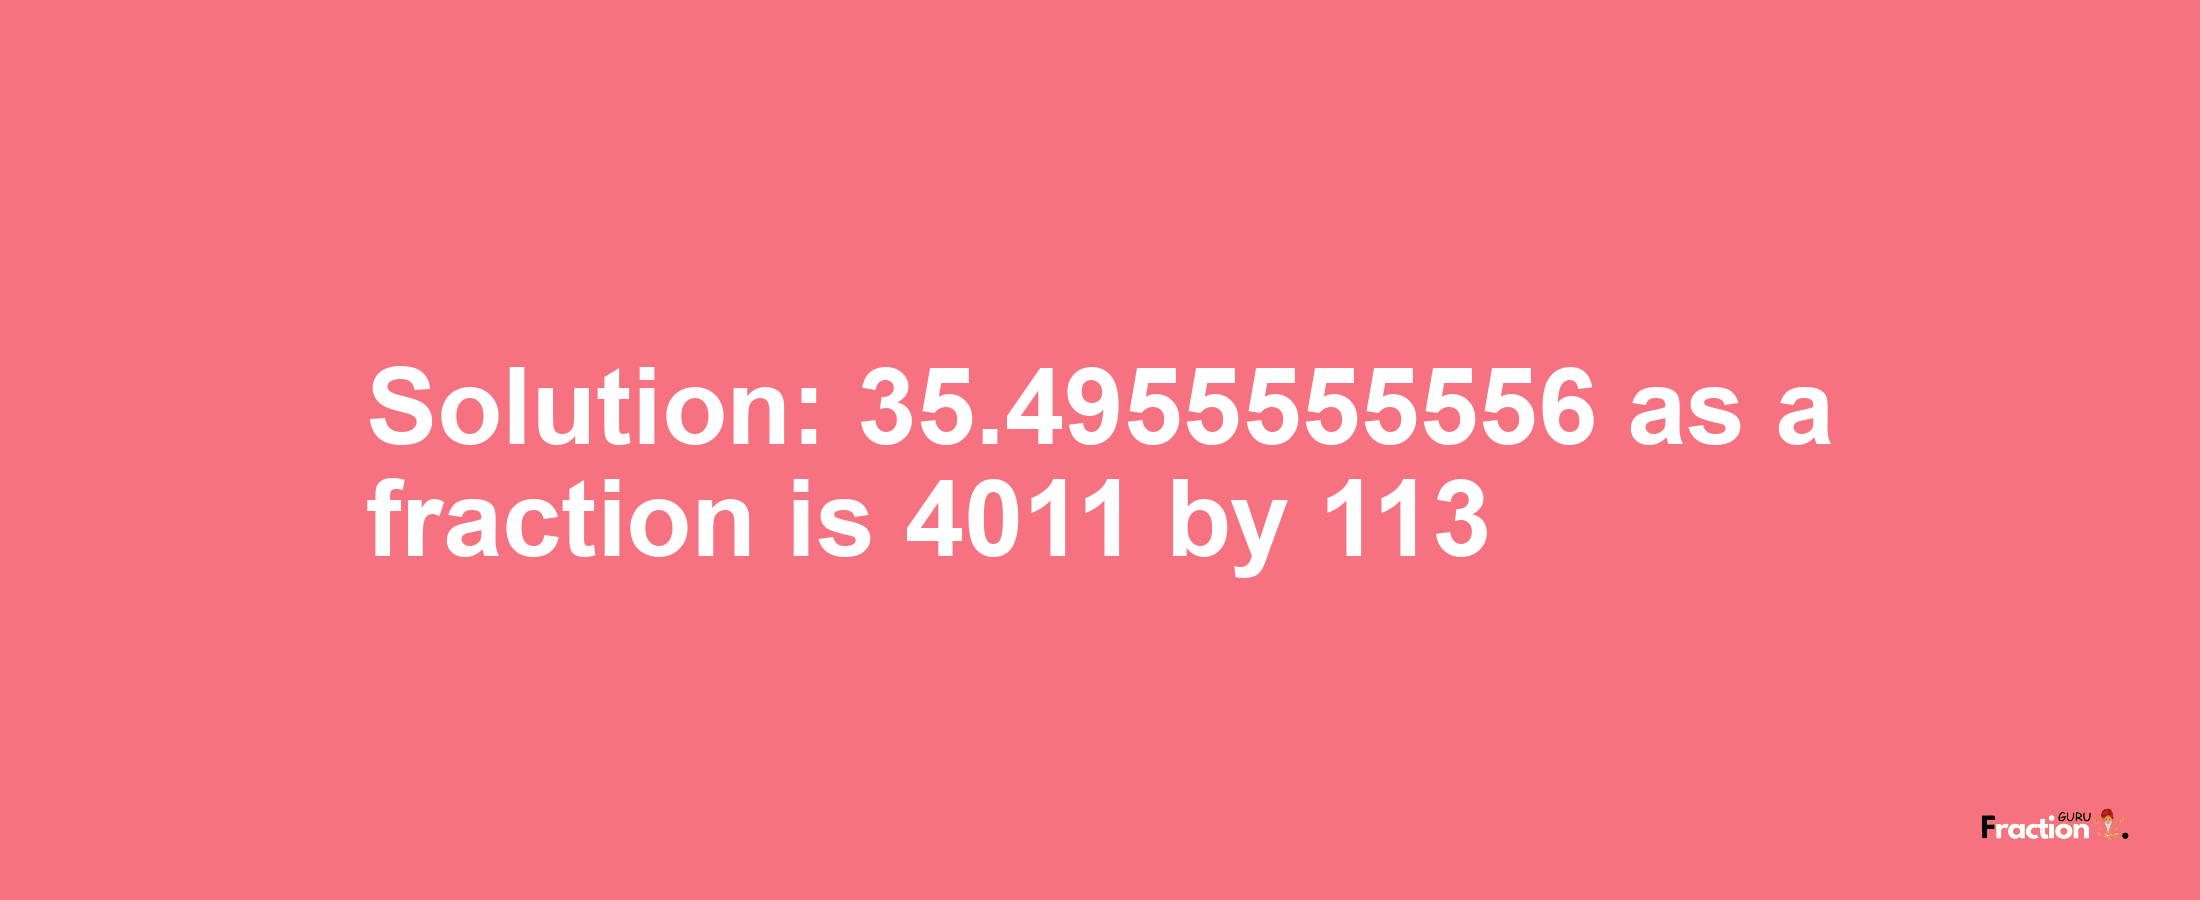 Solution:35.4955555556 as a fraction is 4011/113